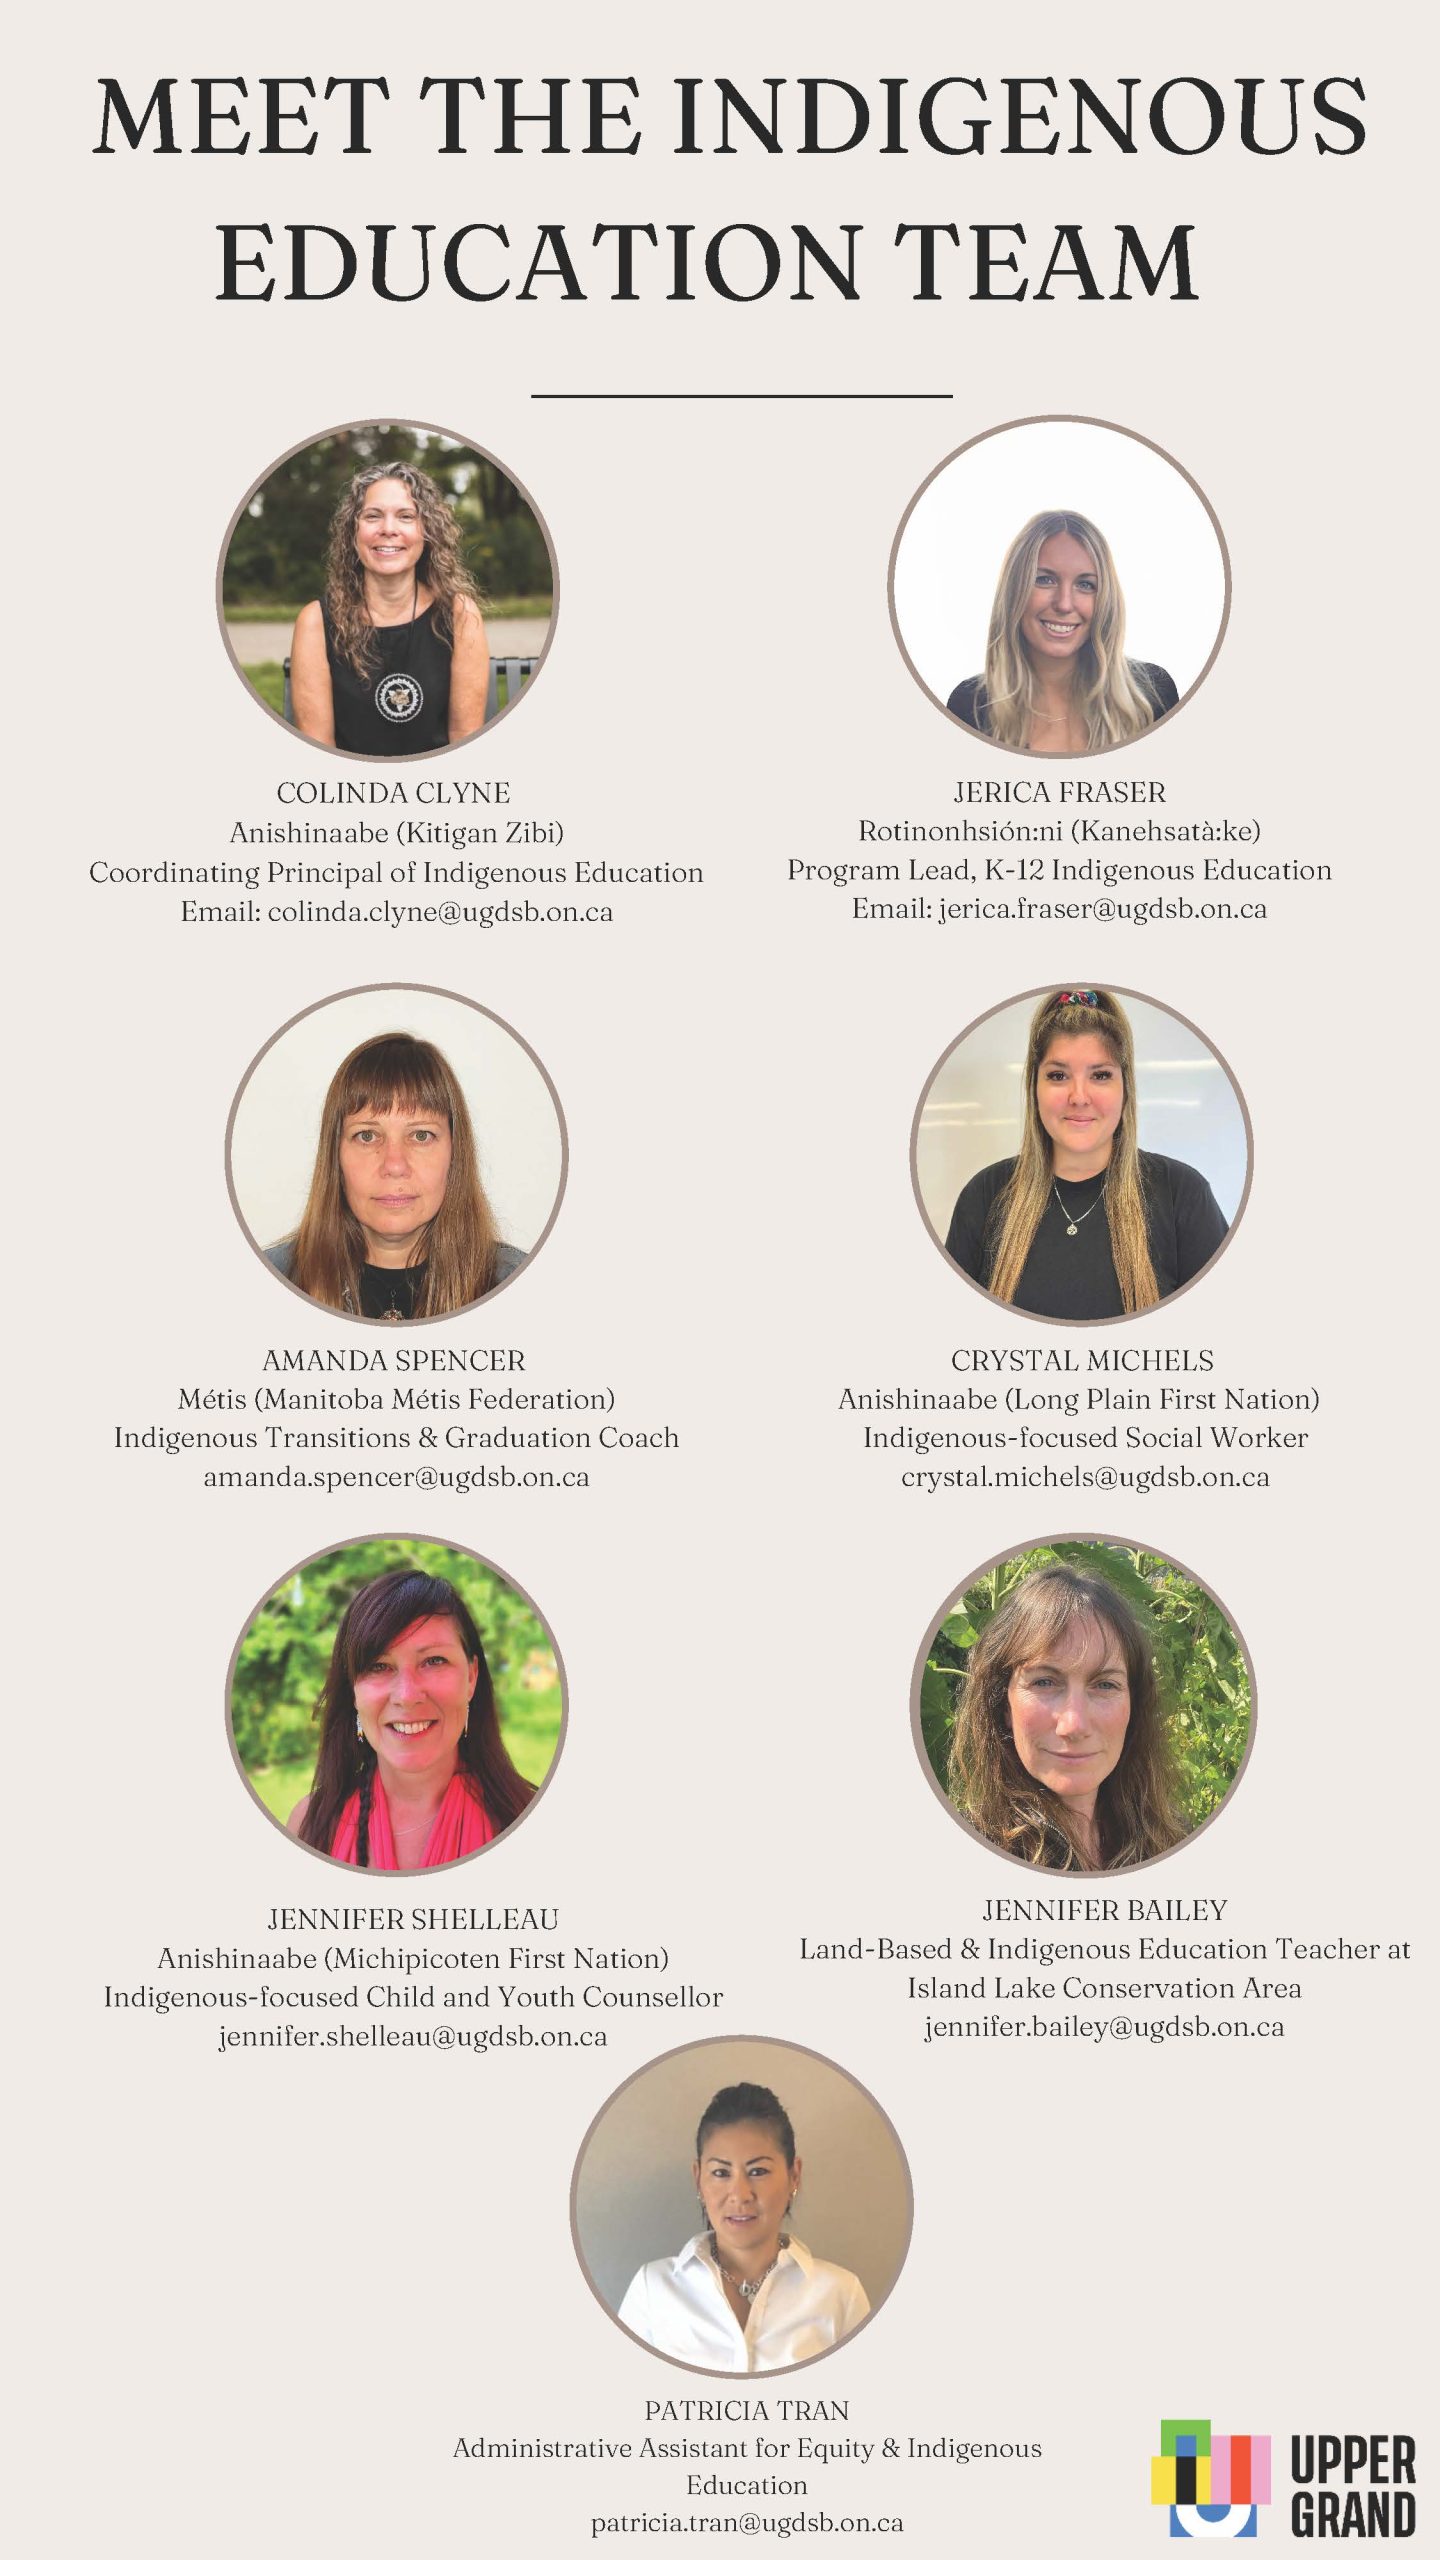 Meet The Indigenous Education Team - photos and contact info for the team. 